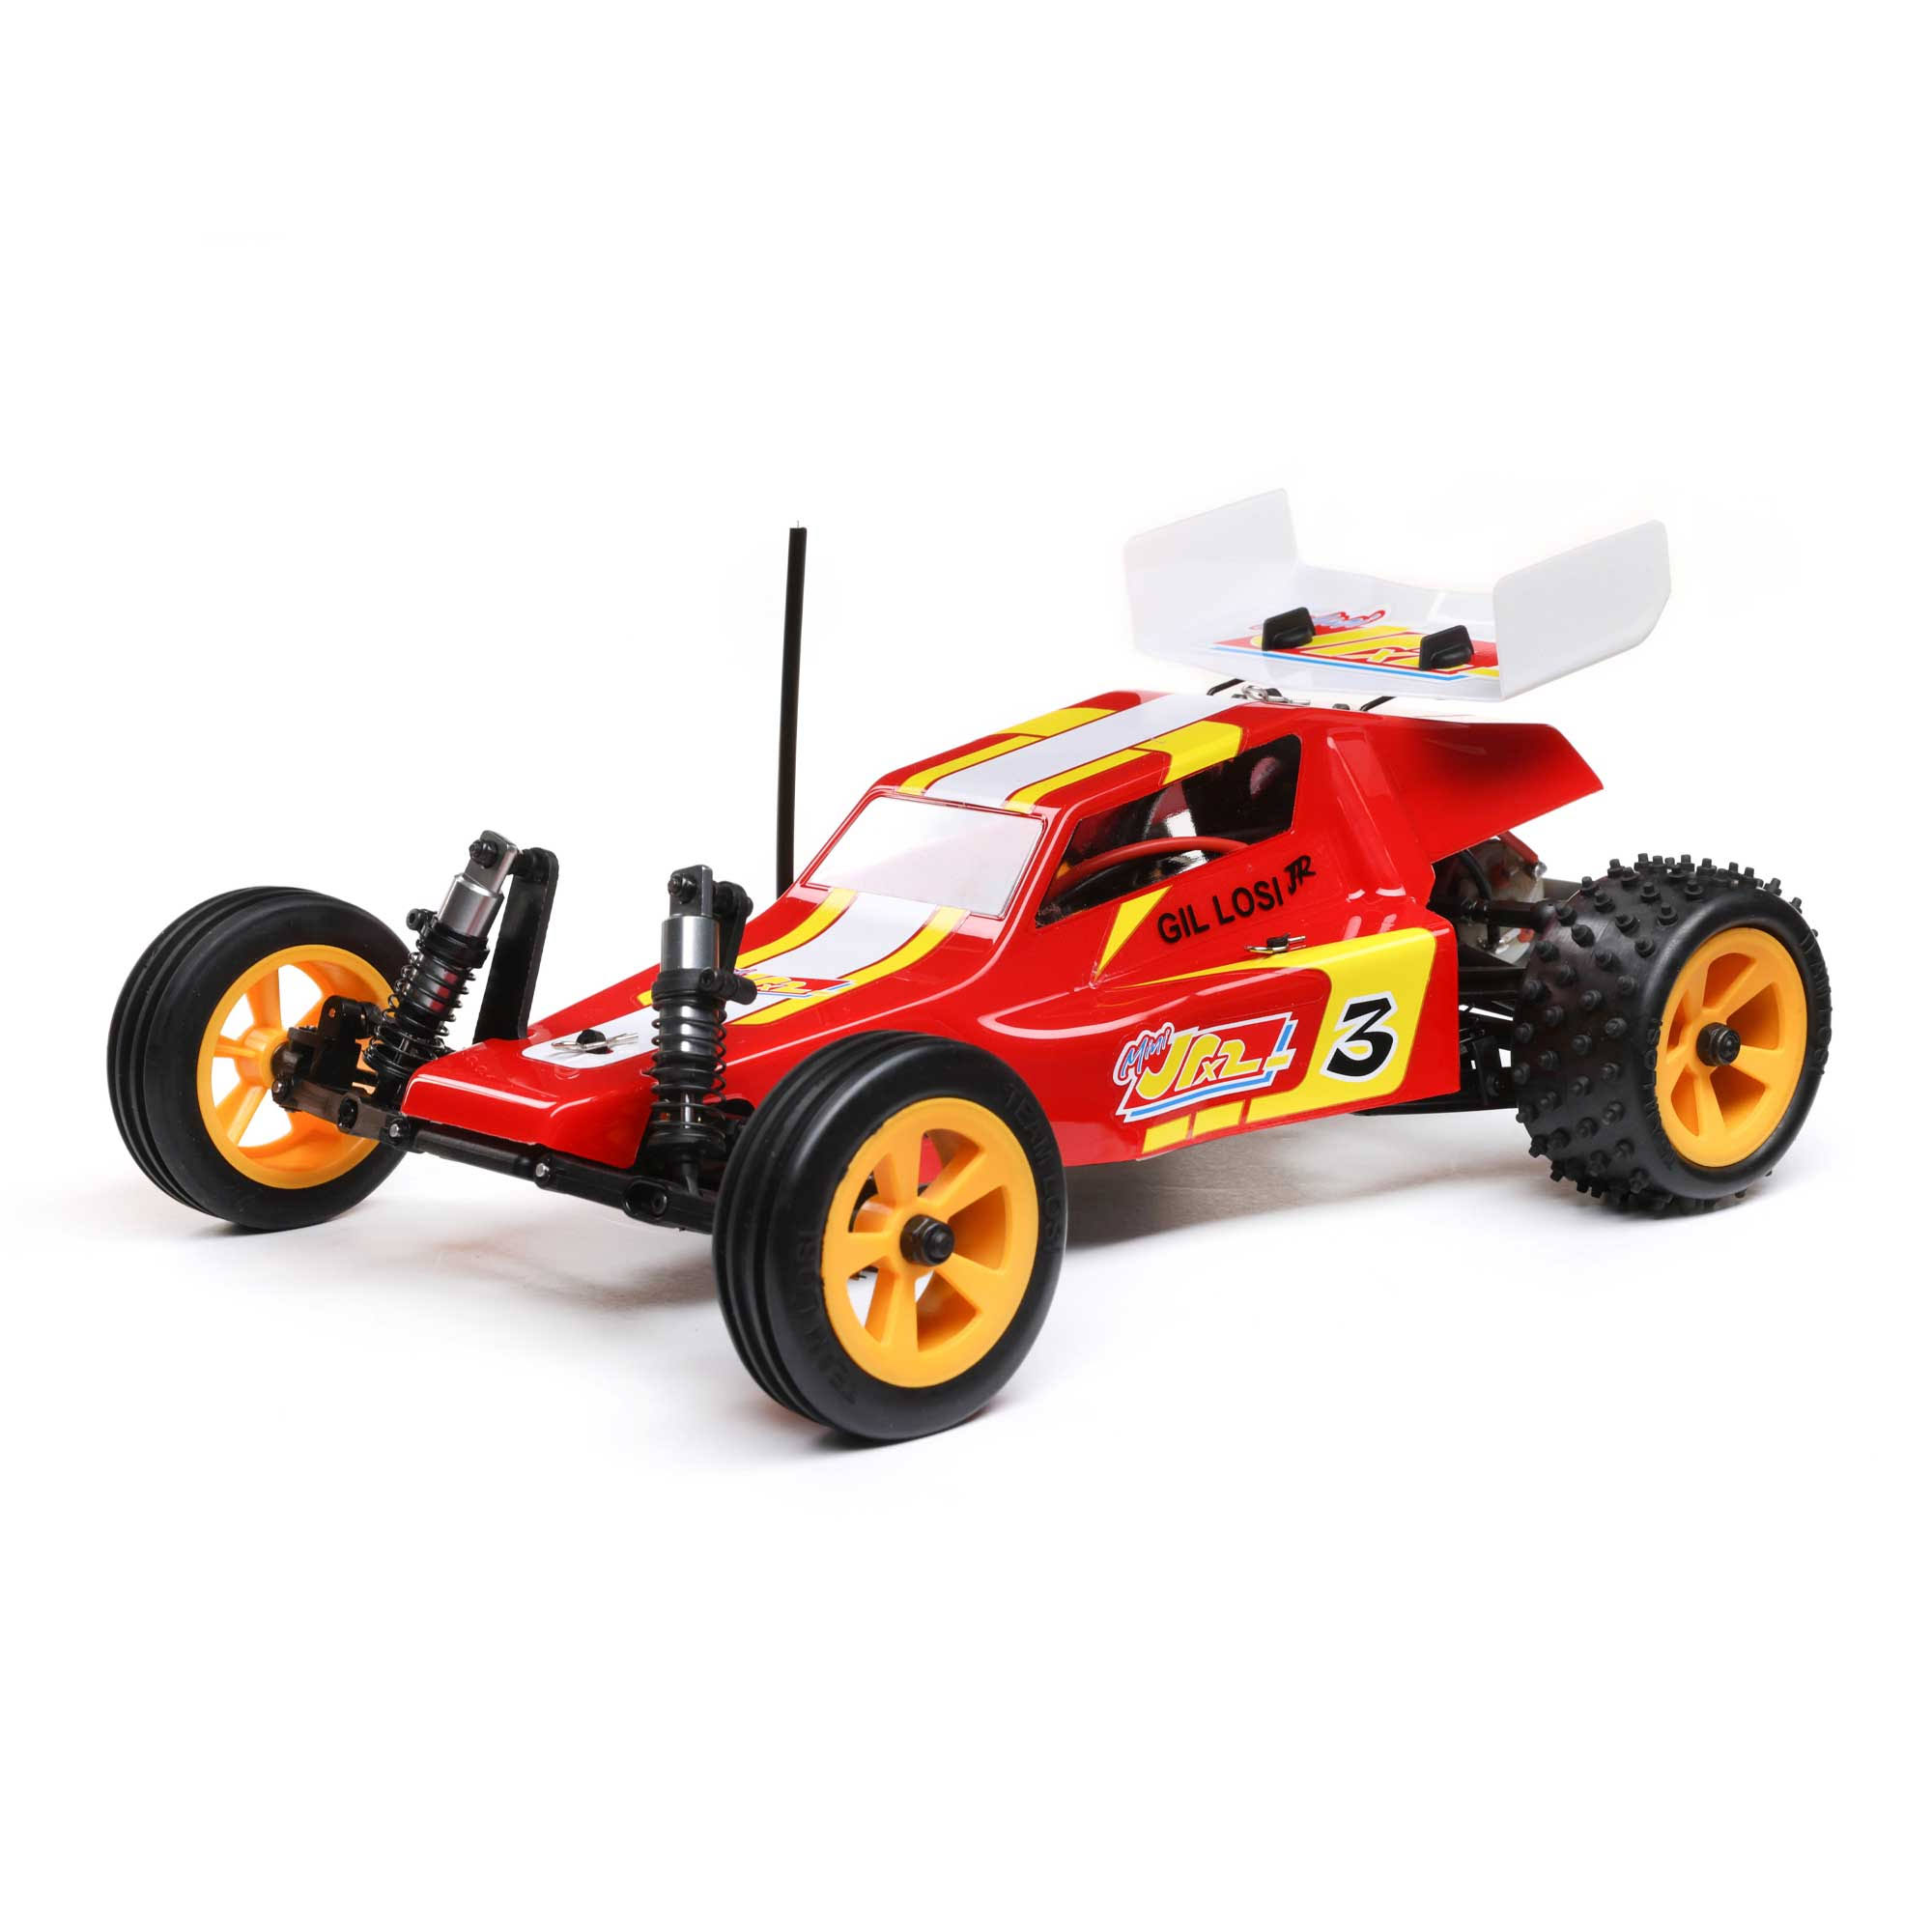 Losi 1/16 Mini JRX2 2WD Buggy Brushed RTR, Red LOS01020T1